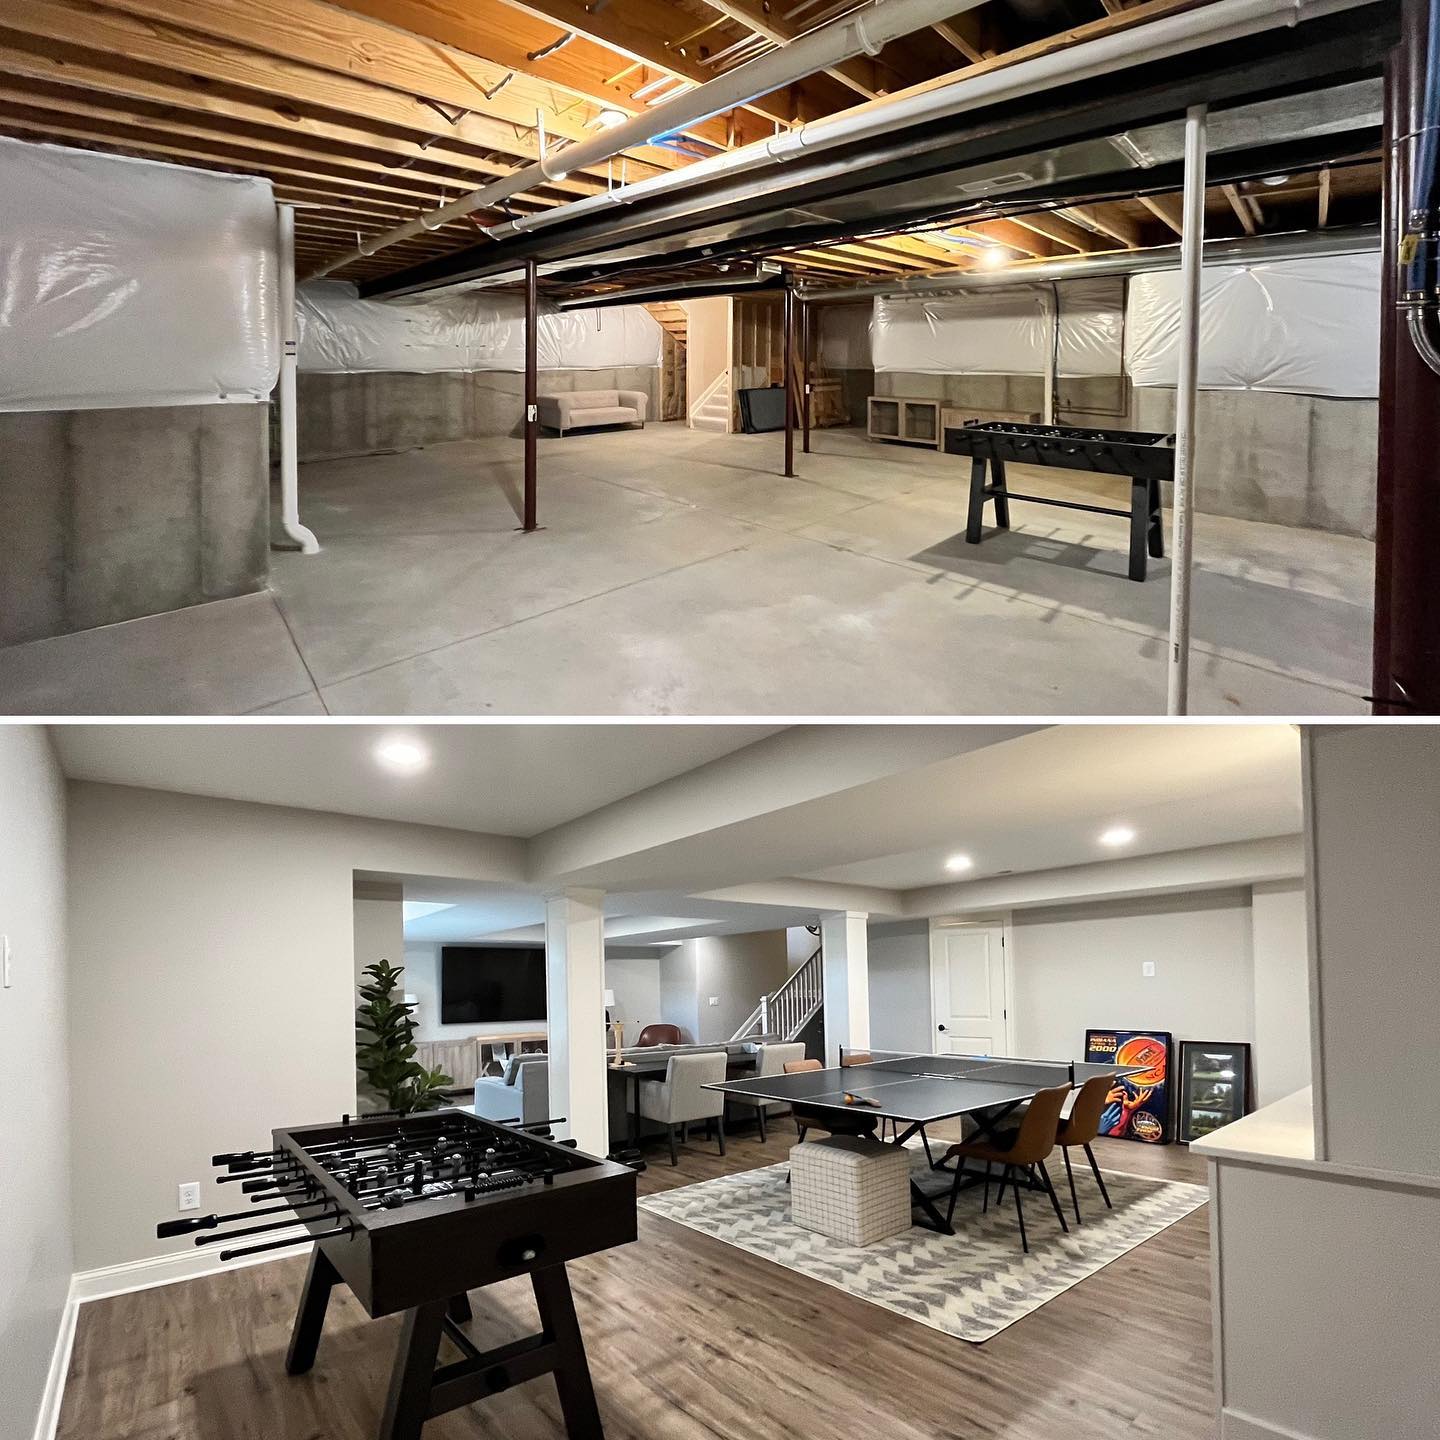 Top: An unfinished basement with exposed pipes and minimal furnishings. Bottom: A finished basement with a foosball table, dining area, and additional seating, featuring a modern decor.